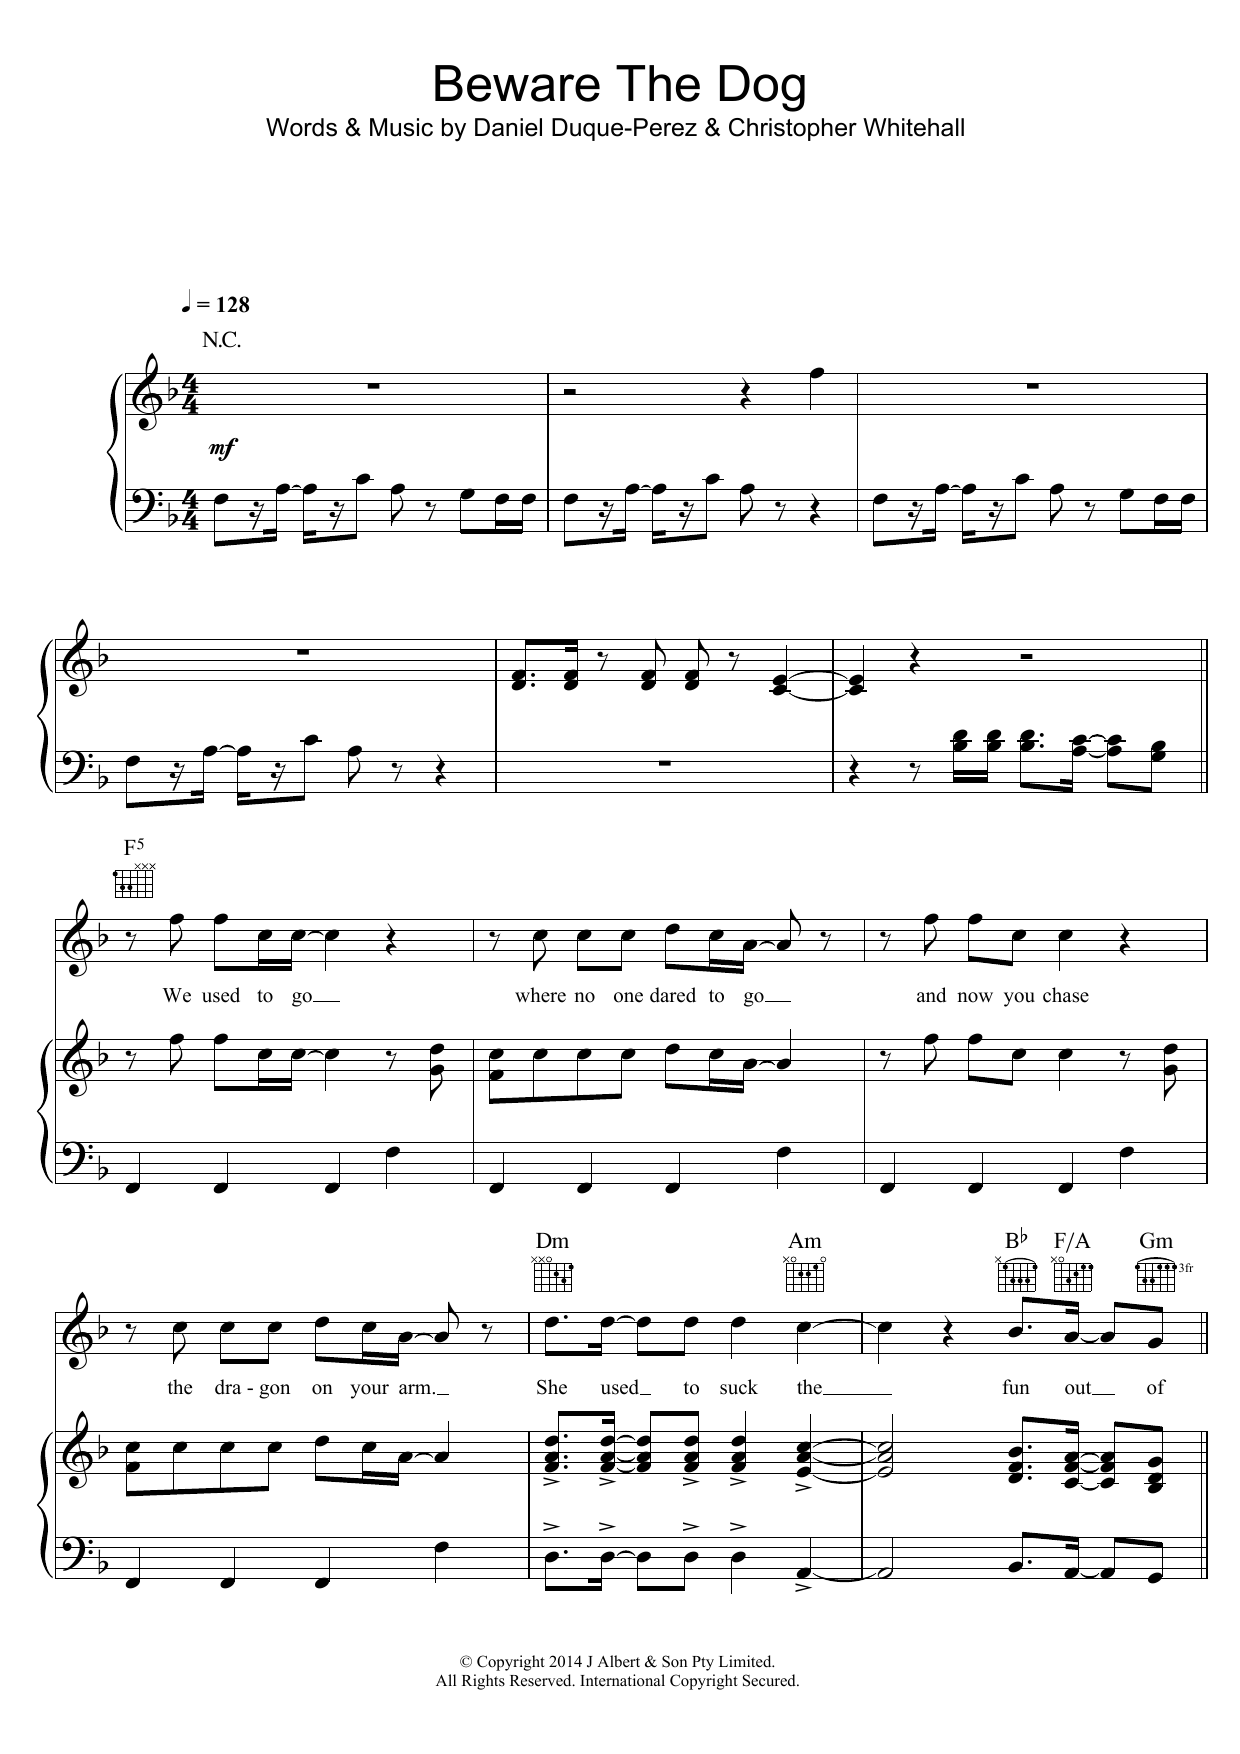 Download The Griswolds Beware The Dog Sheet Music